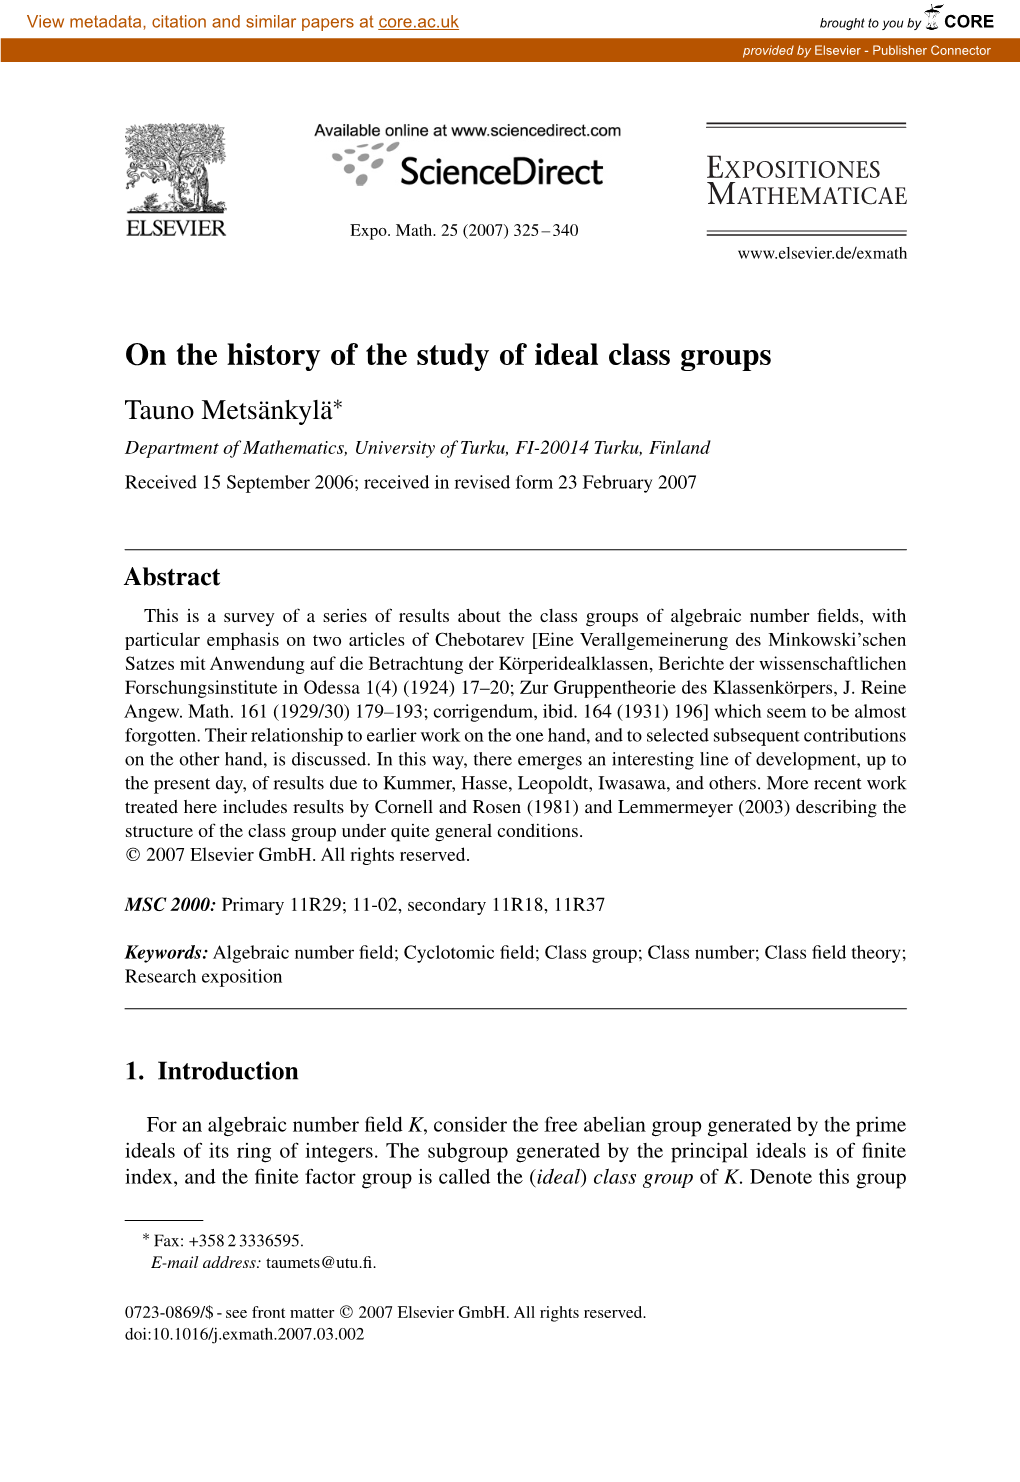 On the History of the Study of Ideal Class Groups